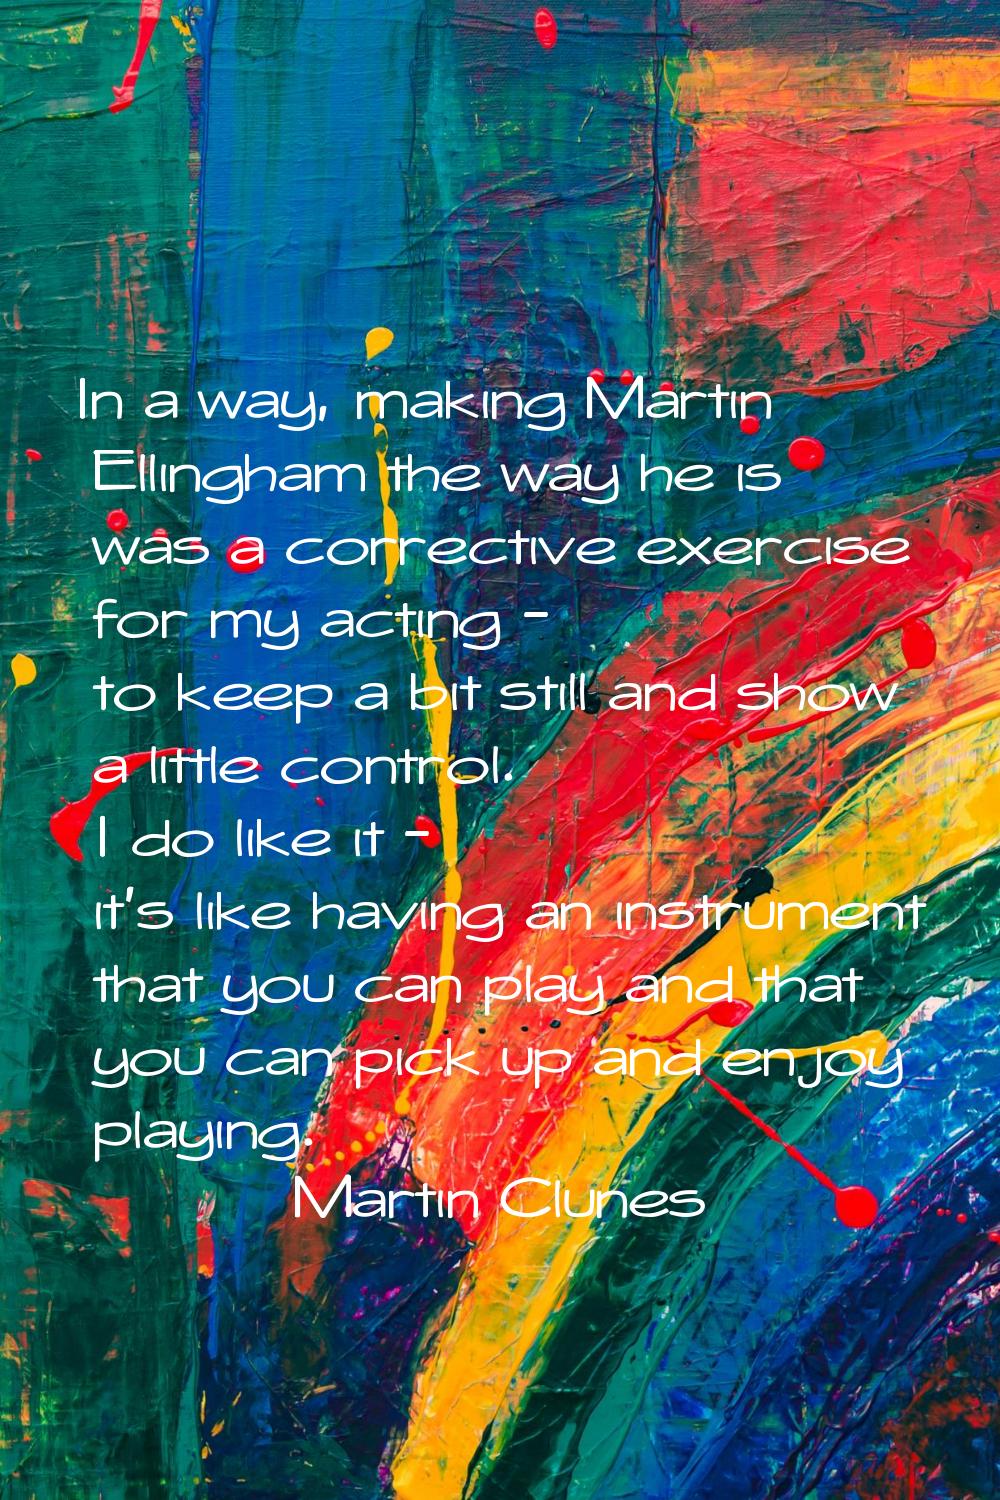 In a way, making Martin Ellingham the way he is was a corrective exercise for my acting - to keep a